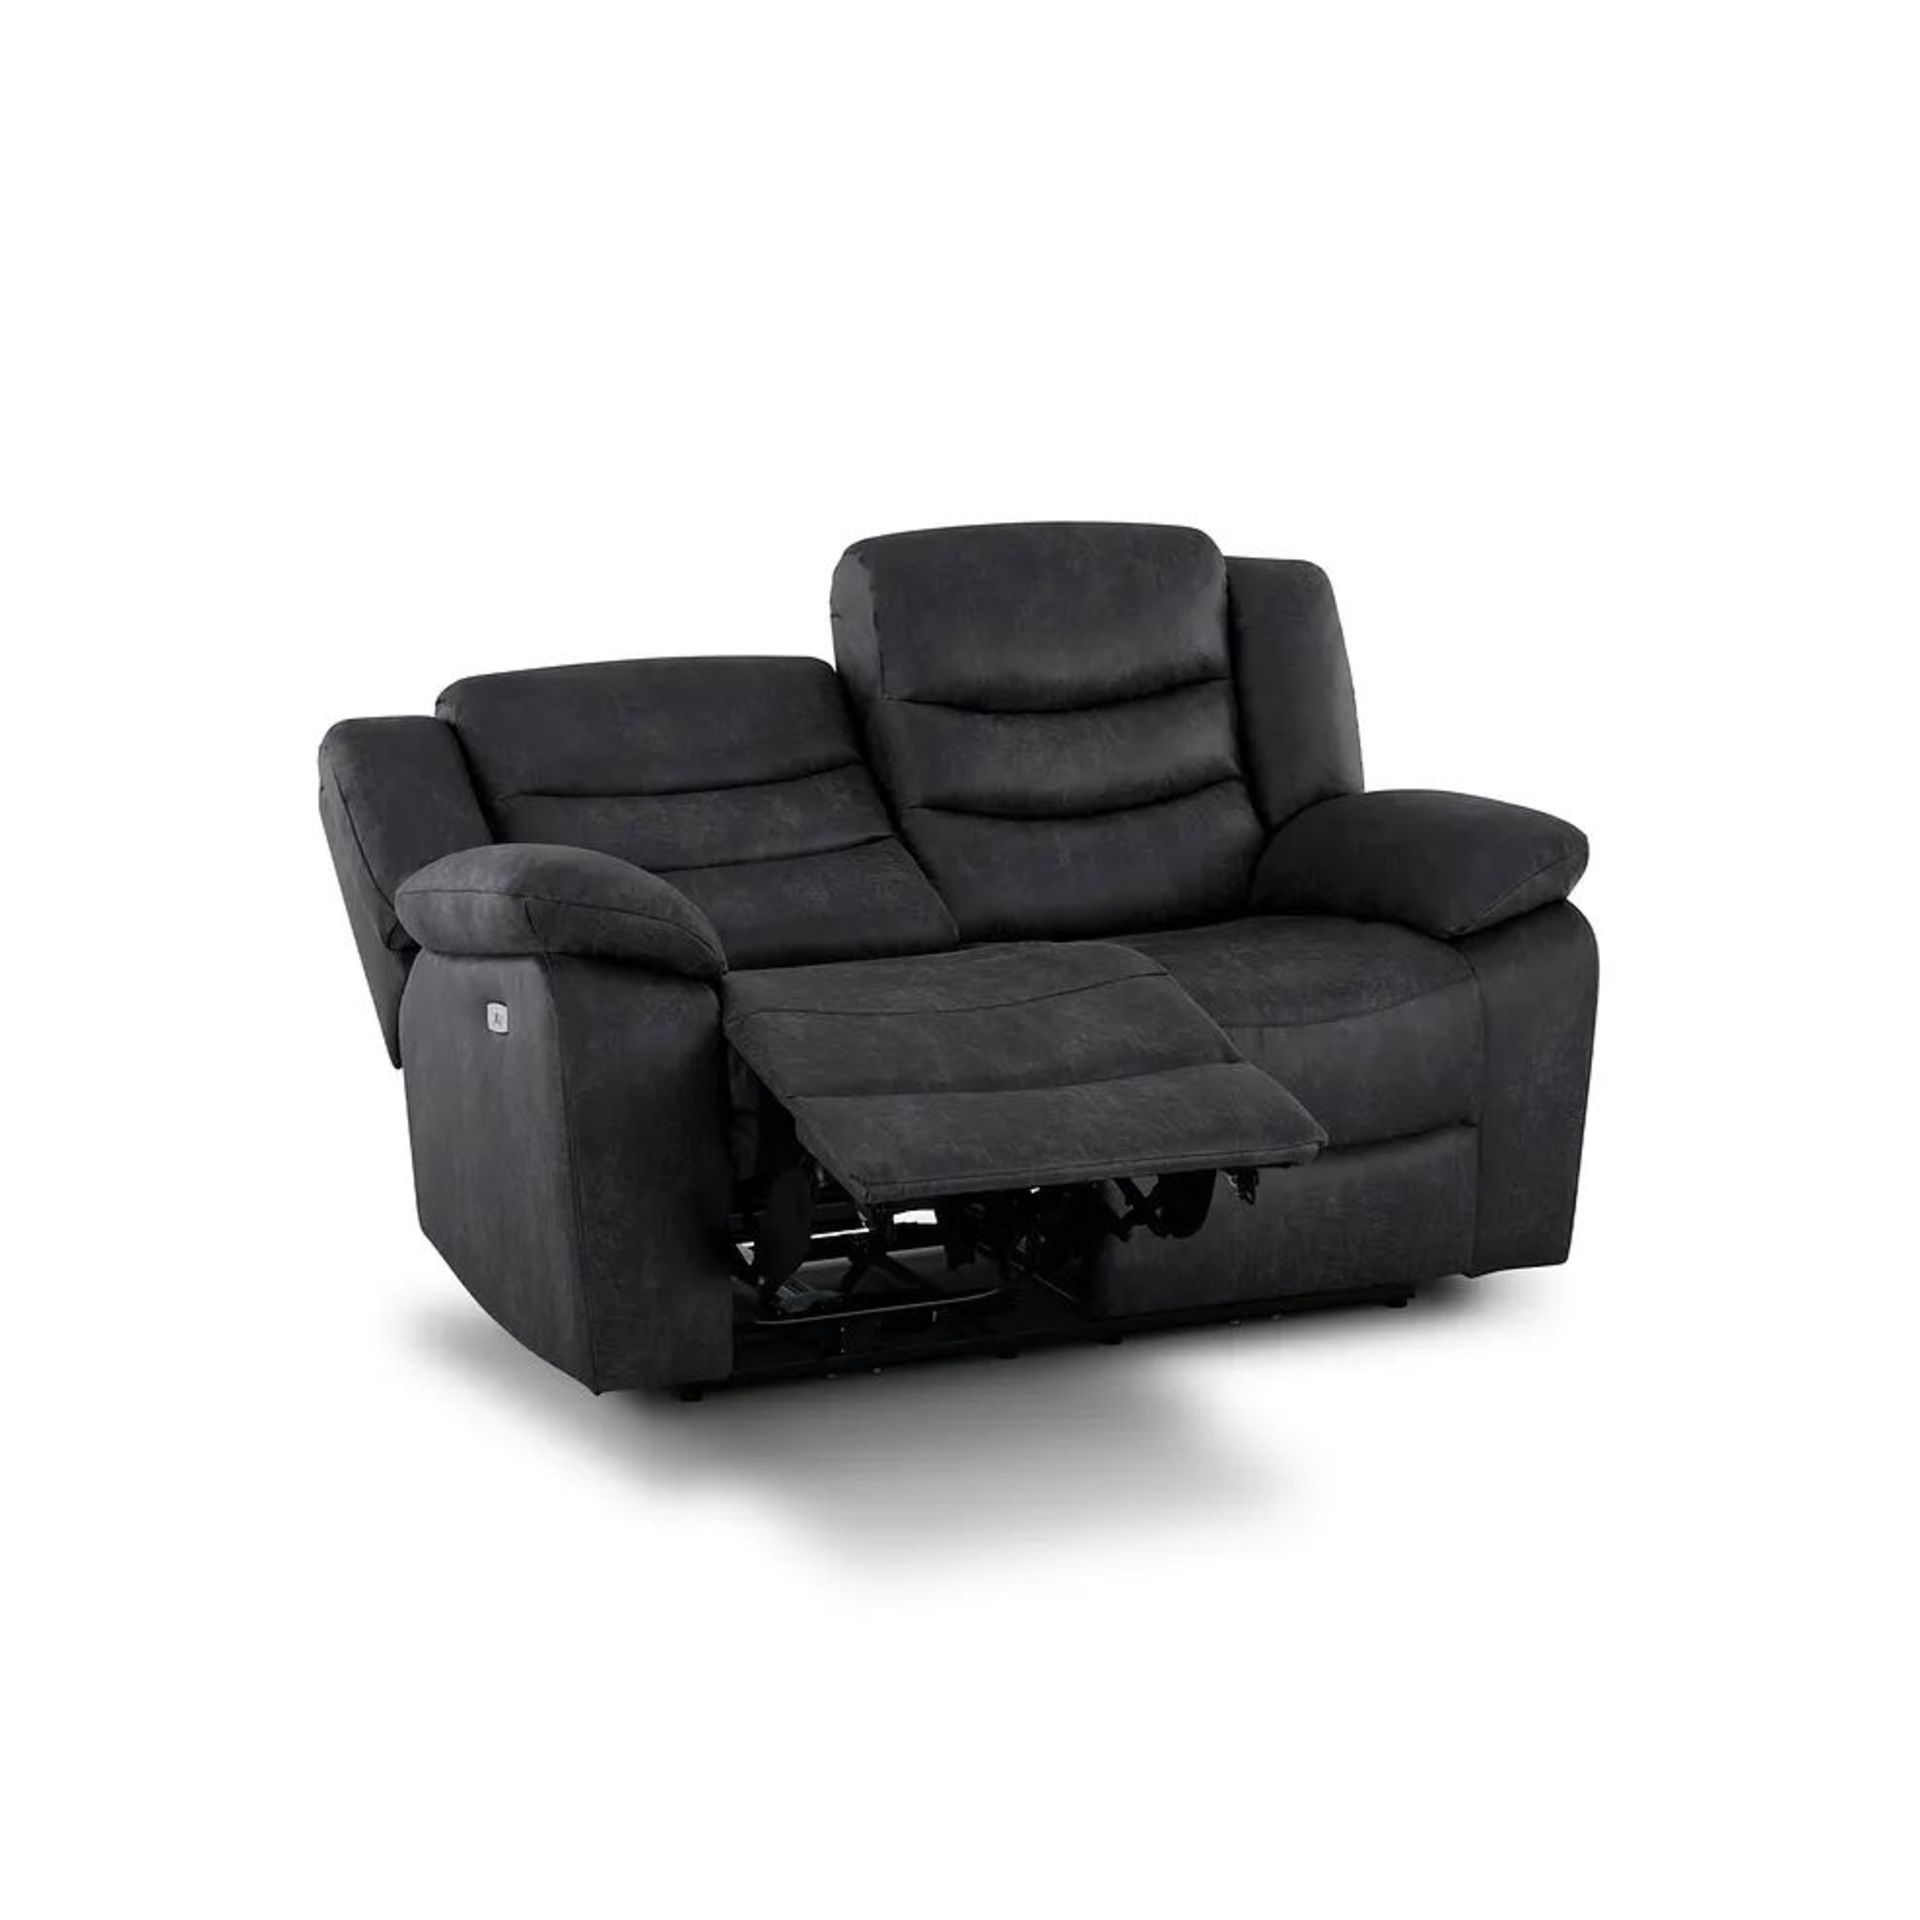 BRAND NEW MARLOW 2 Seater Electric Recliner Sofa - MILLER GREY FABRIC. RRP £1049. Designed to suit - Bild 4 aus 12